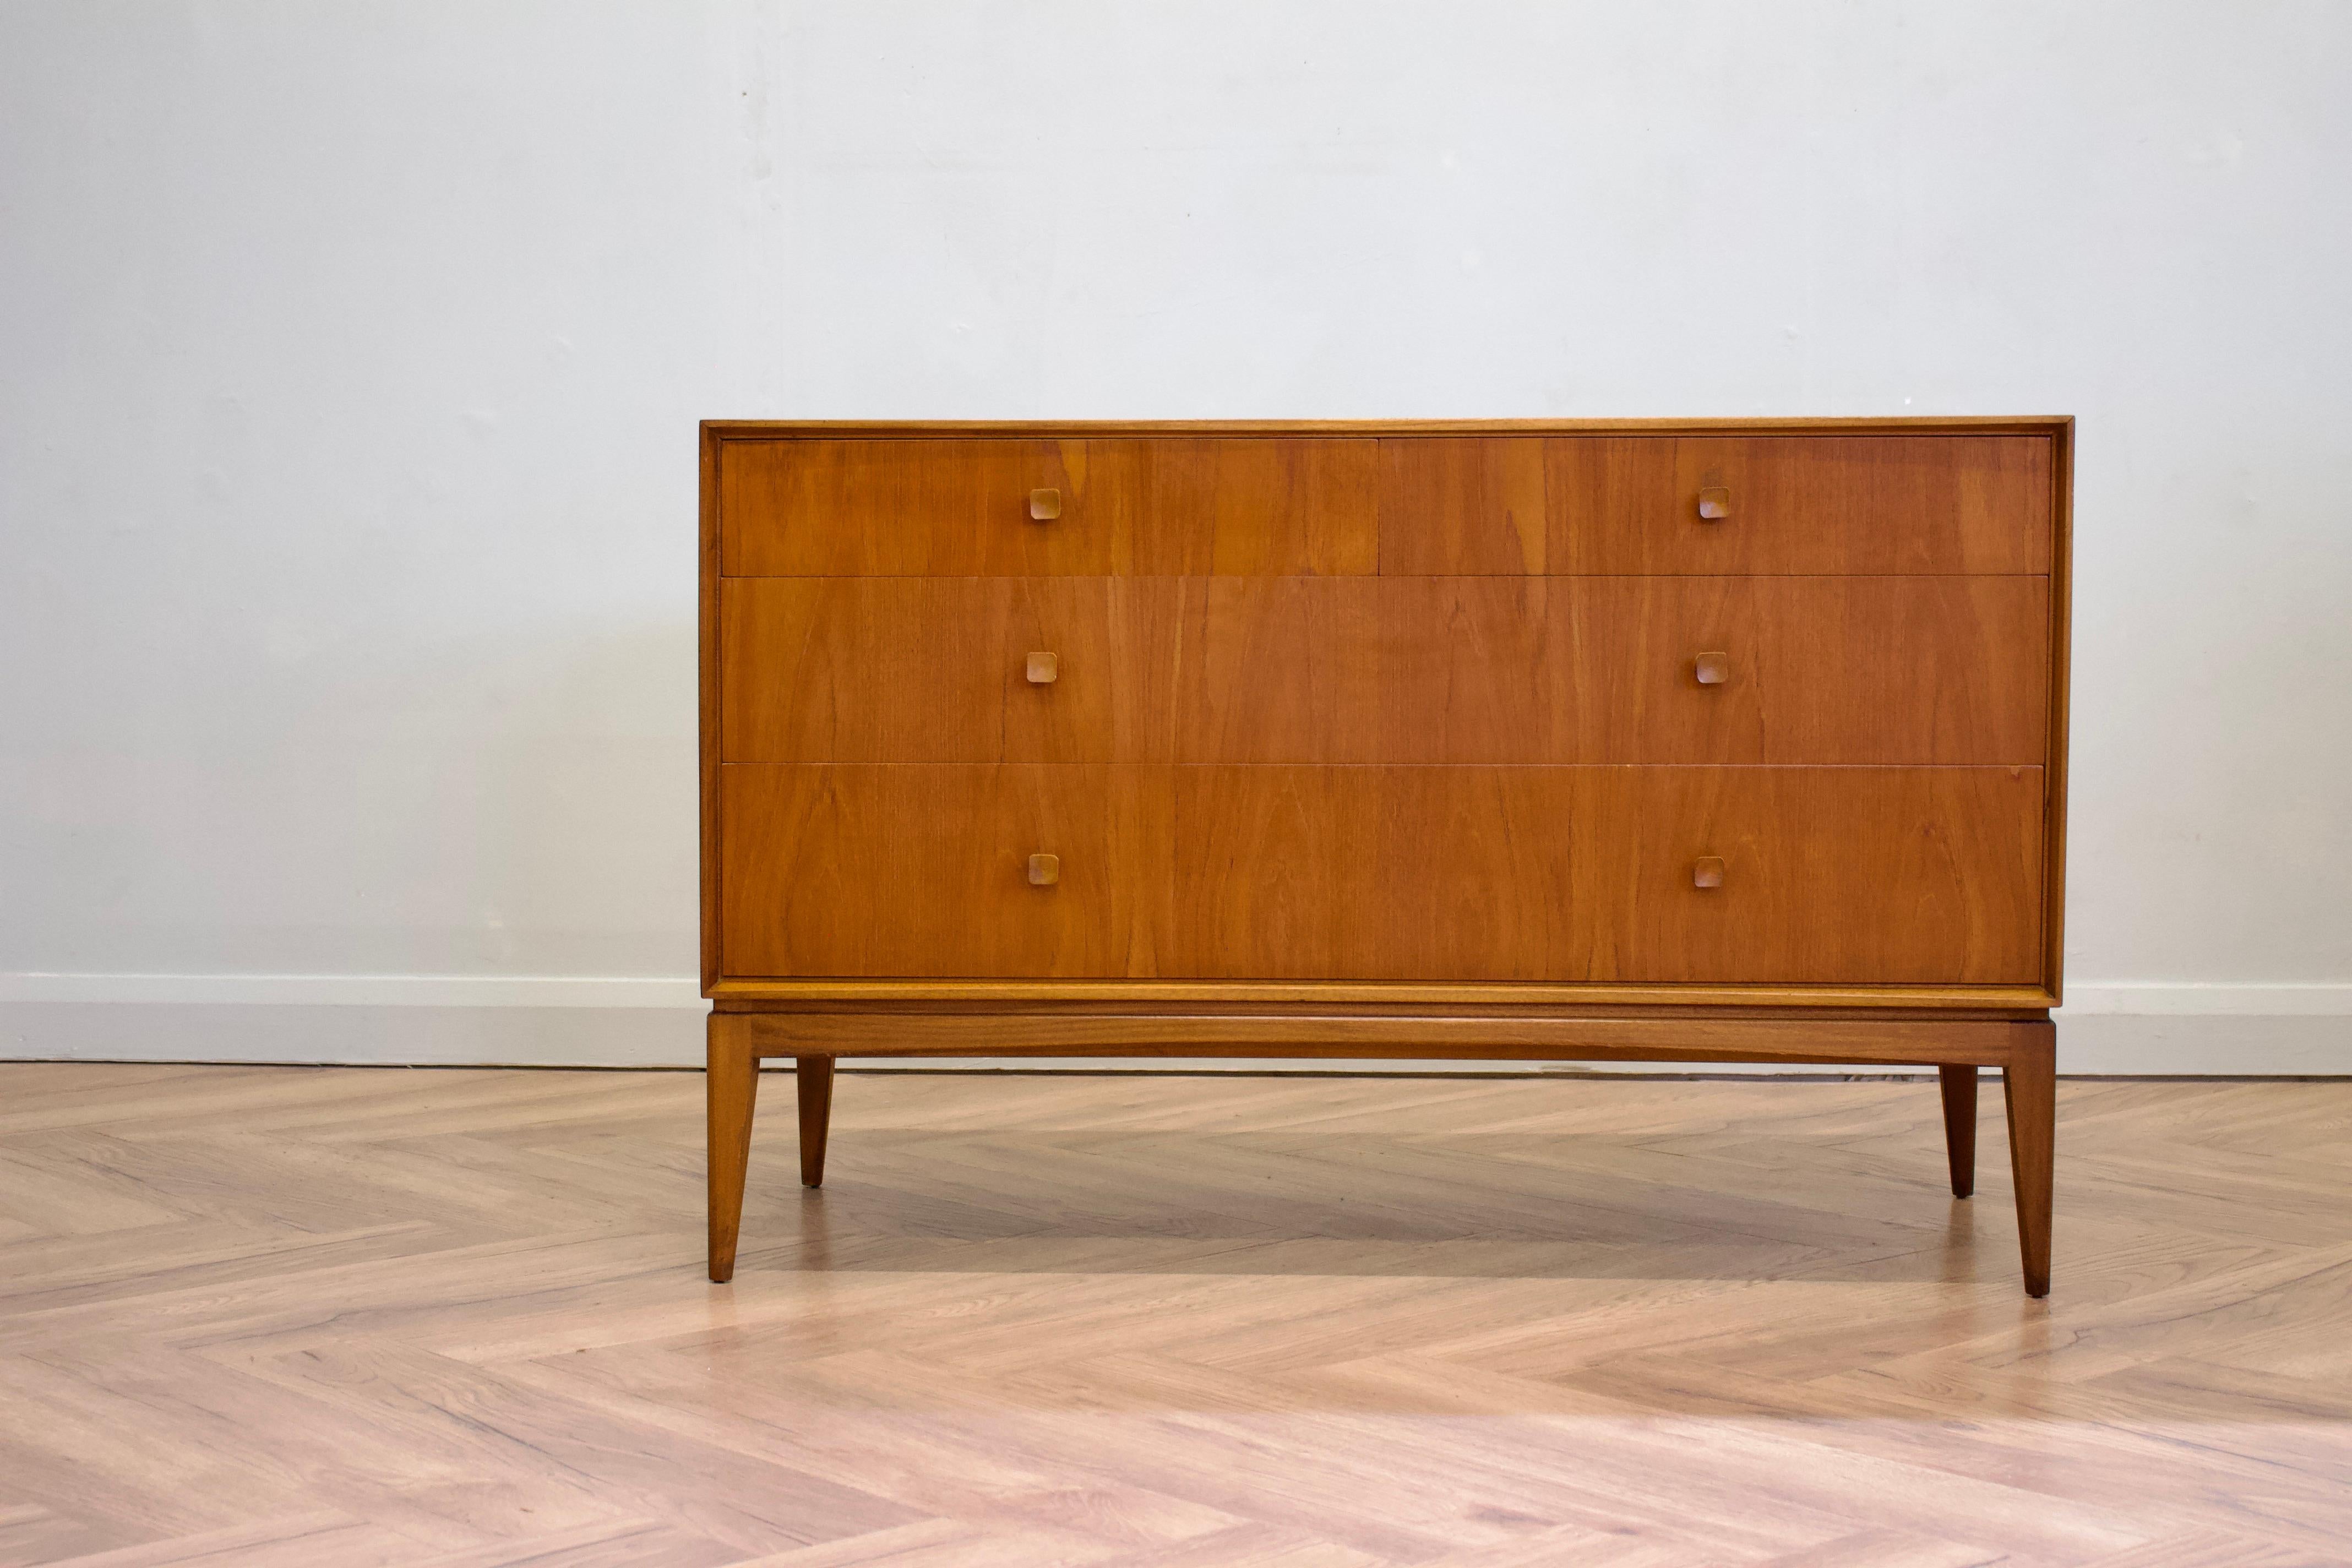 - Mid century chest of drawers
- Manufactured in the UK by Mcintosh
- Made from teak and teak veneer.